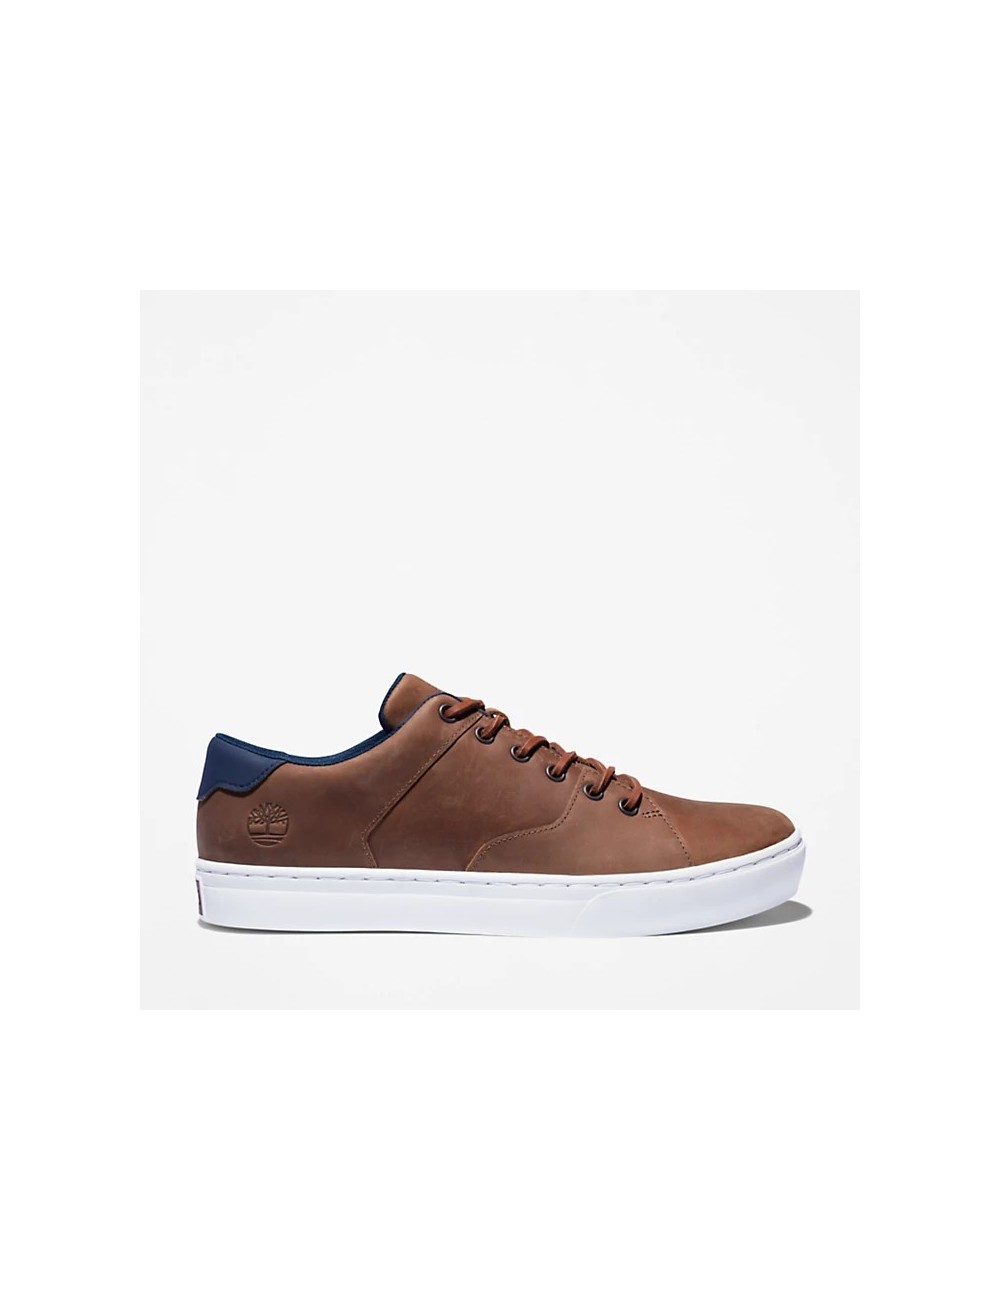 MEN'S SNEAKERS TIMERLAND ADV 2.0 LEATHER